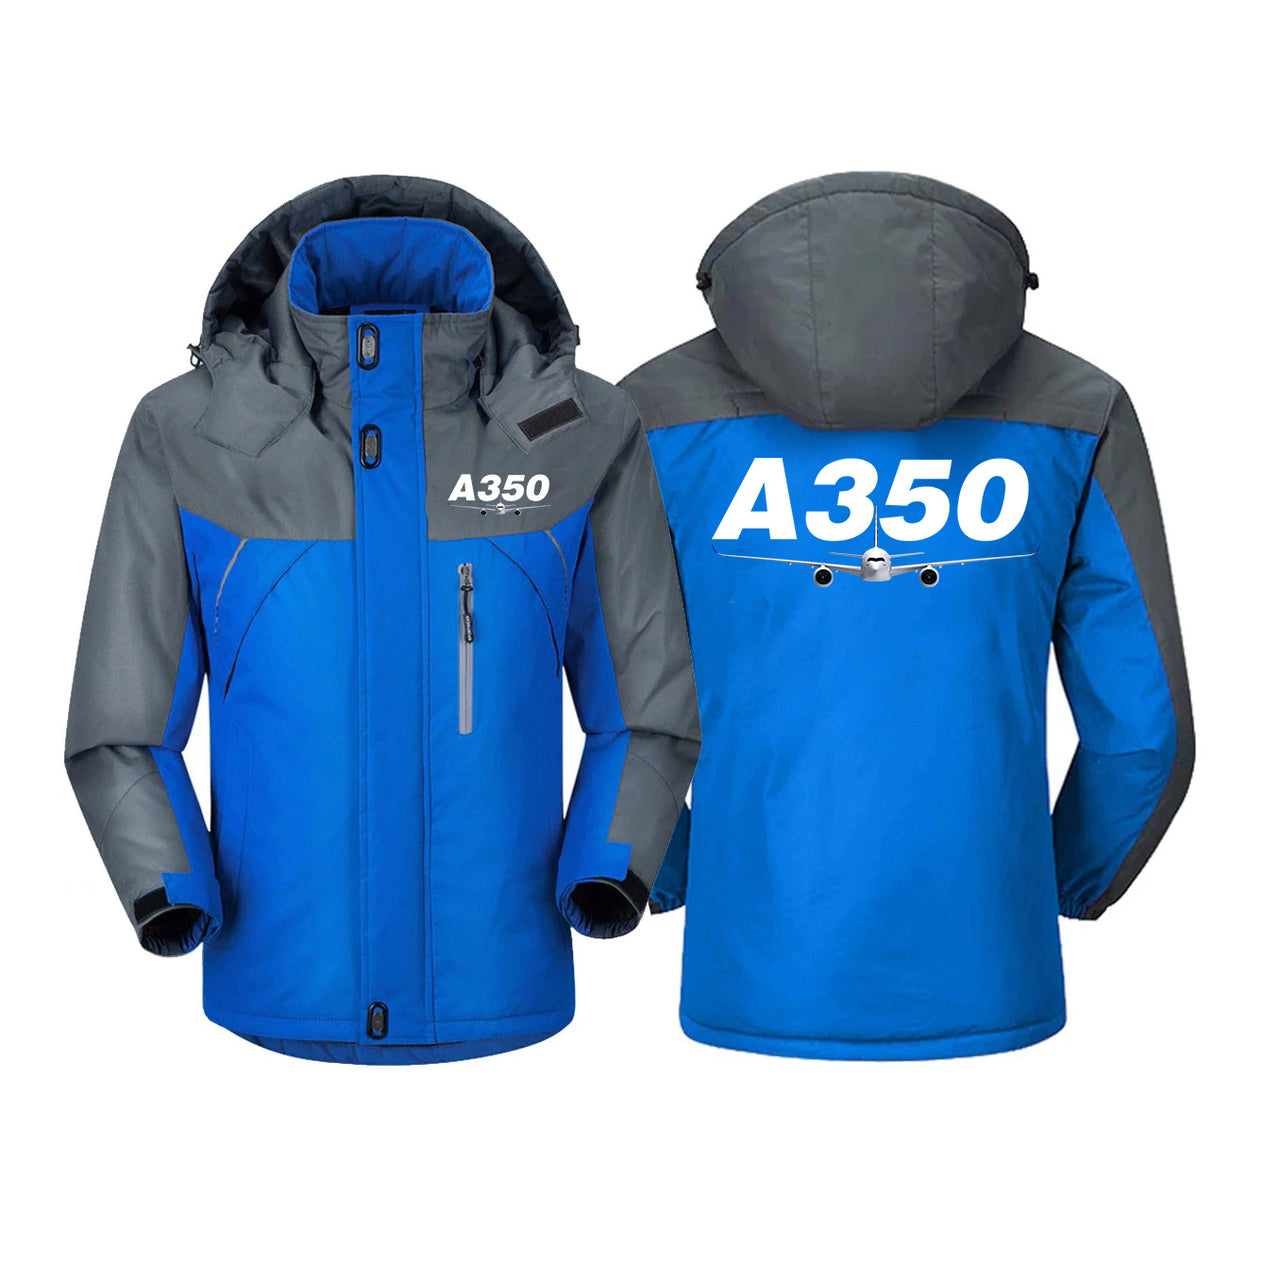 Super Airbus A350 Designed Thick Winter Jackets